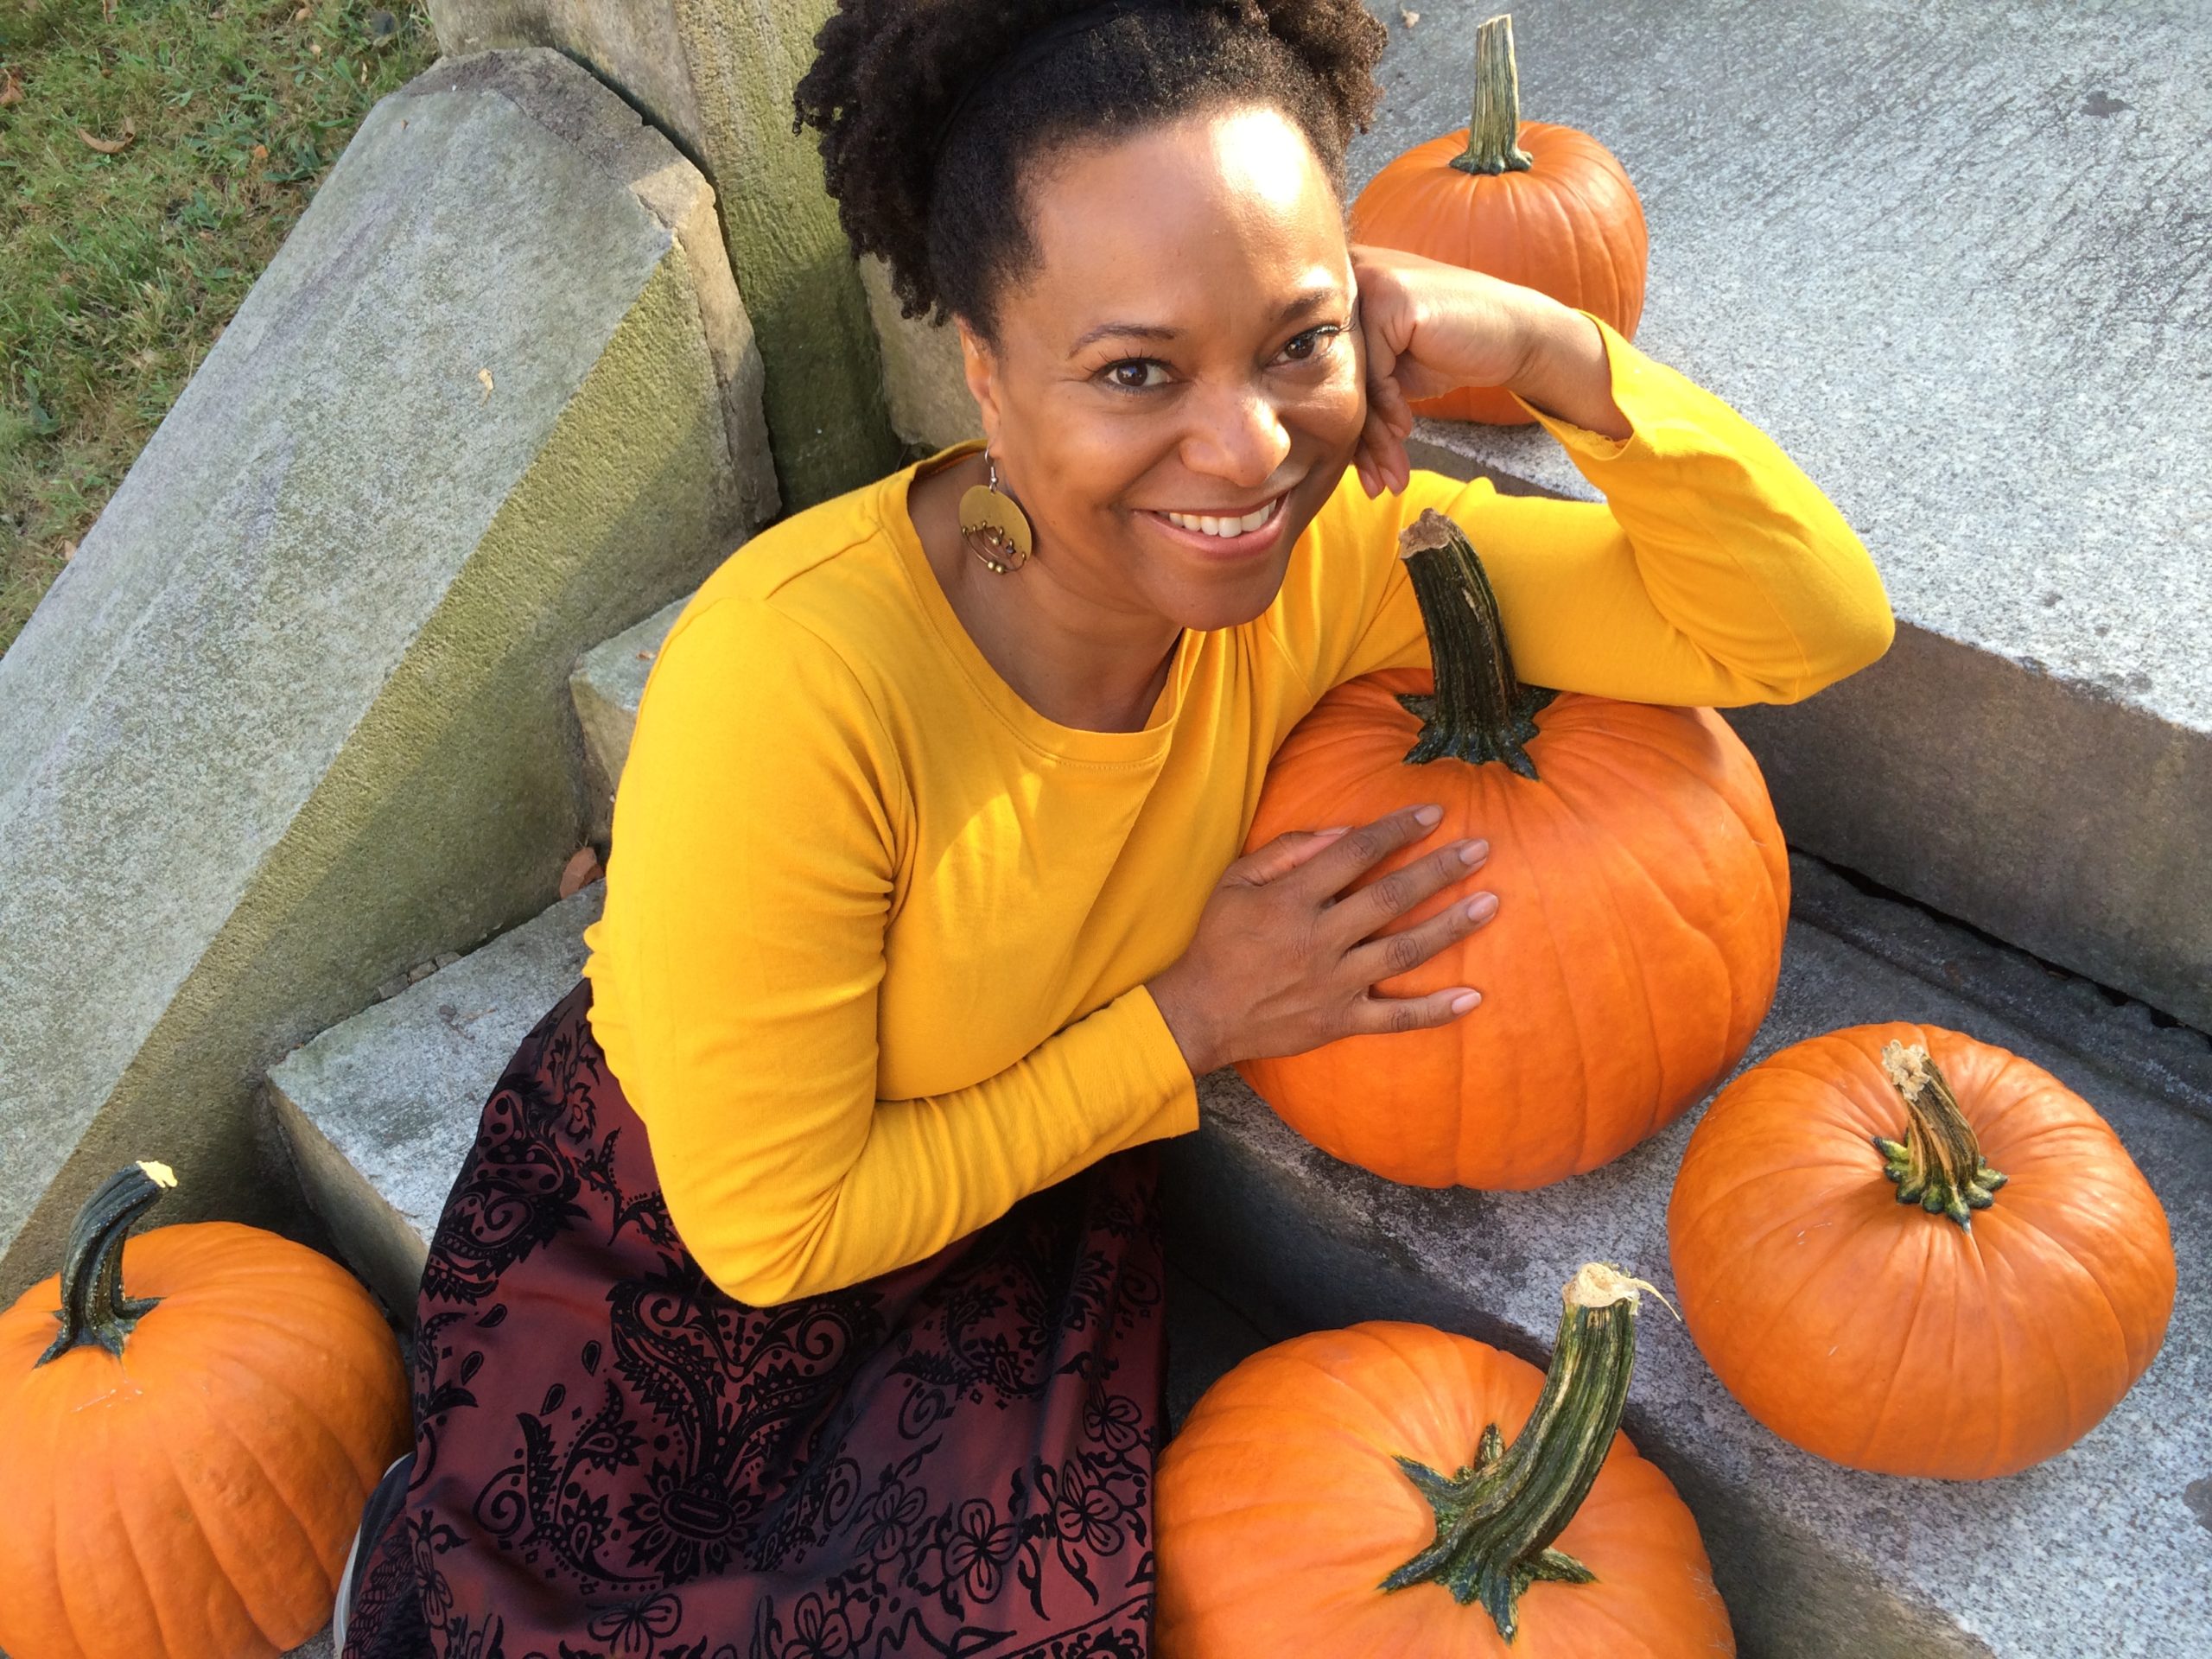 April Armstrong smiling and resting on pumpkins